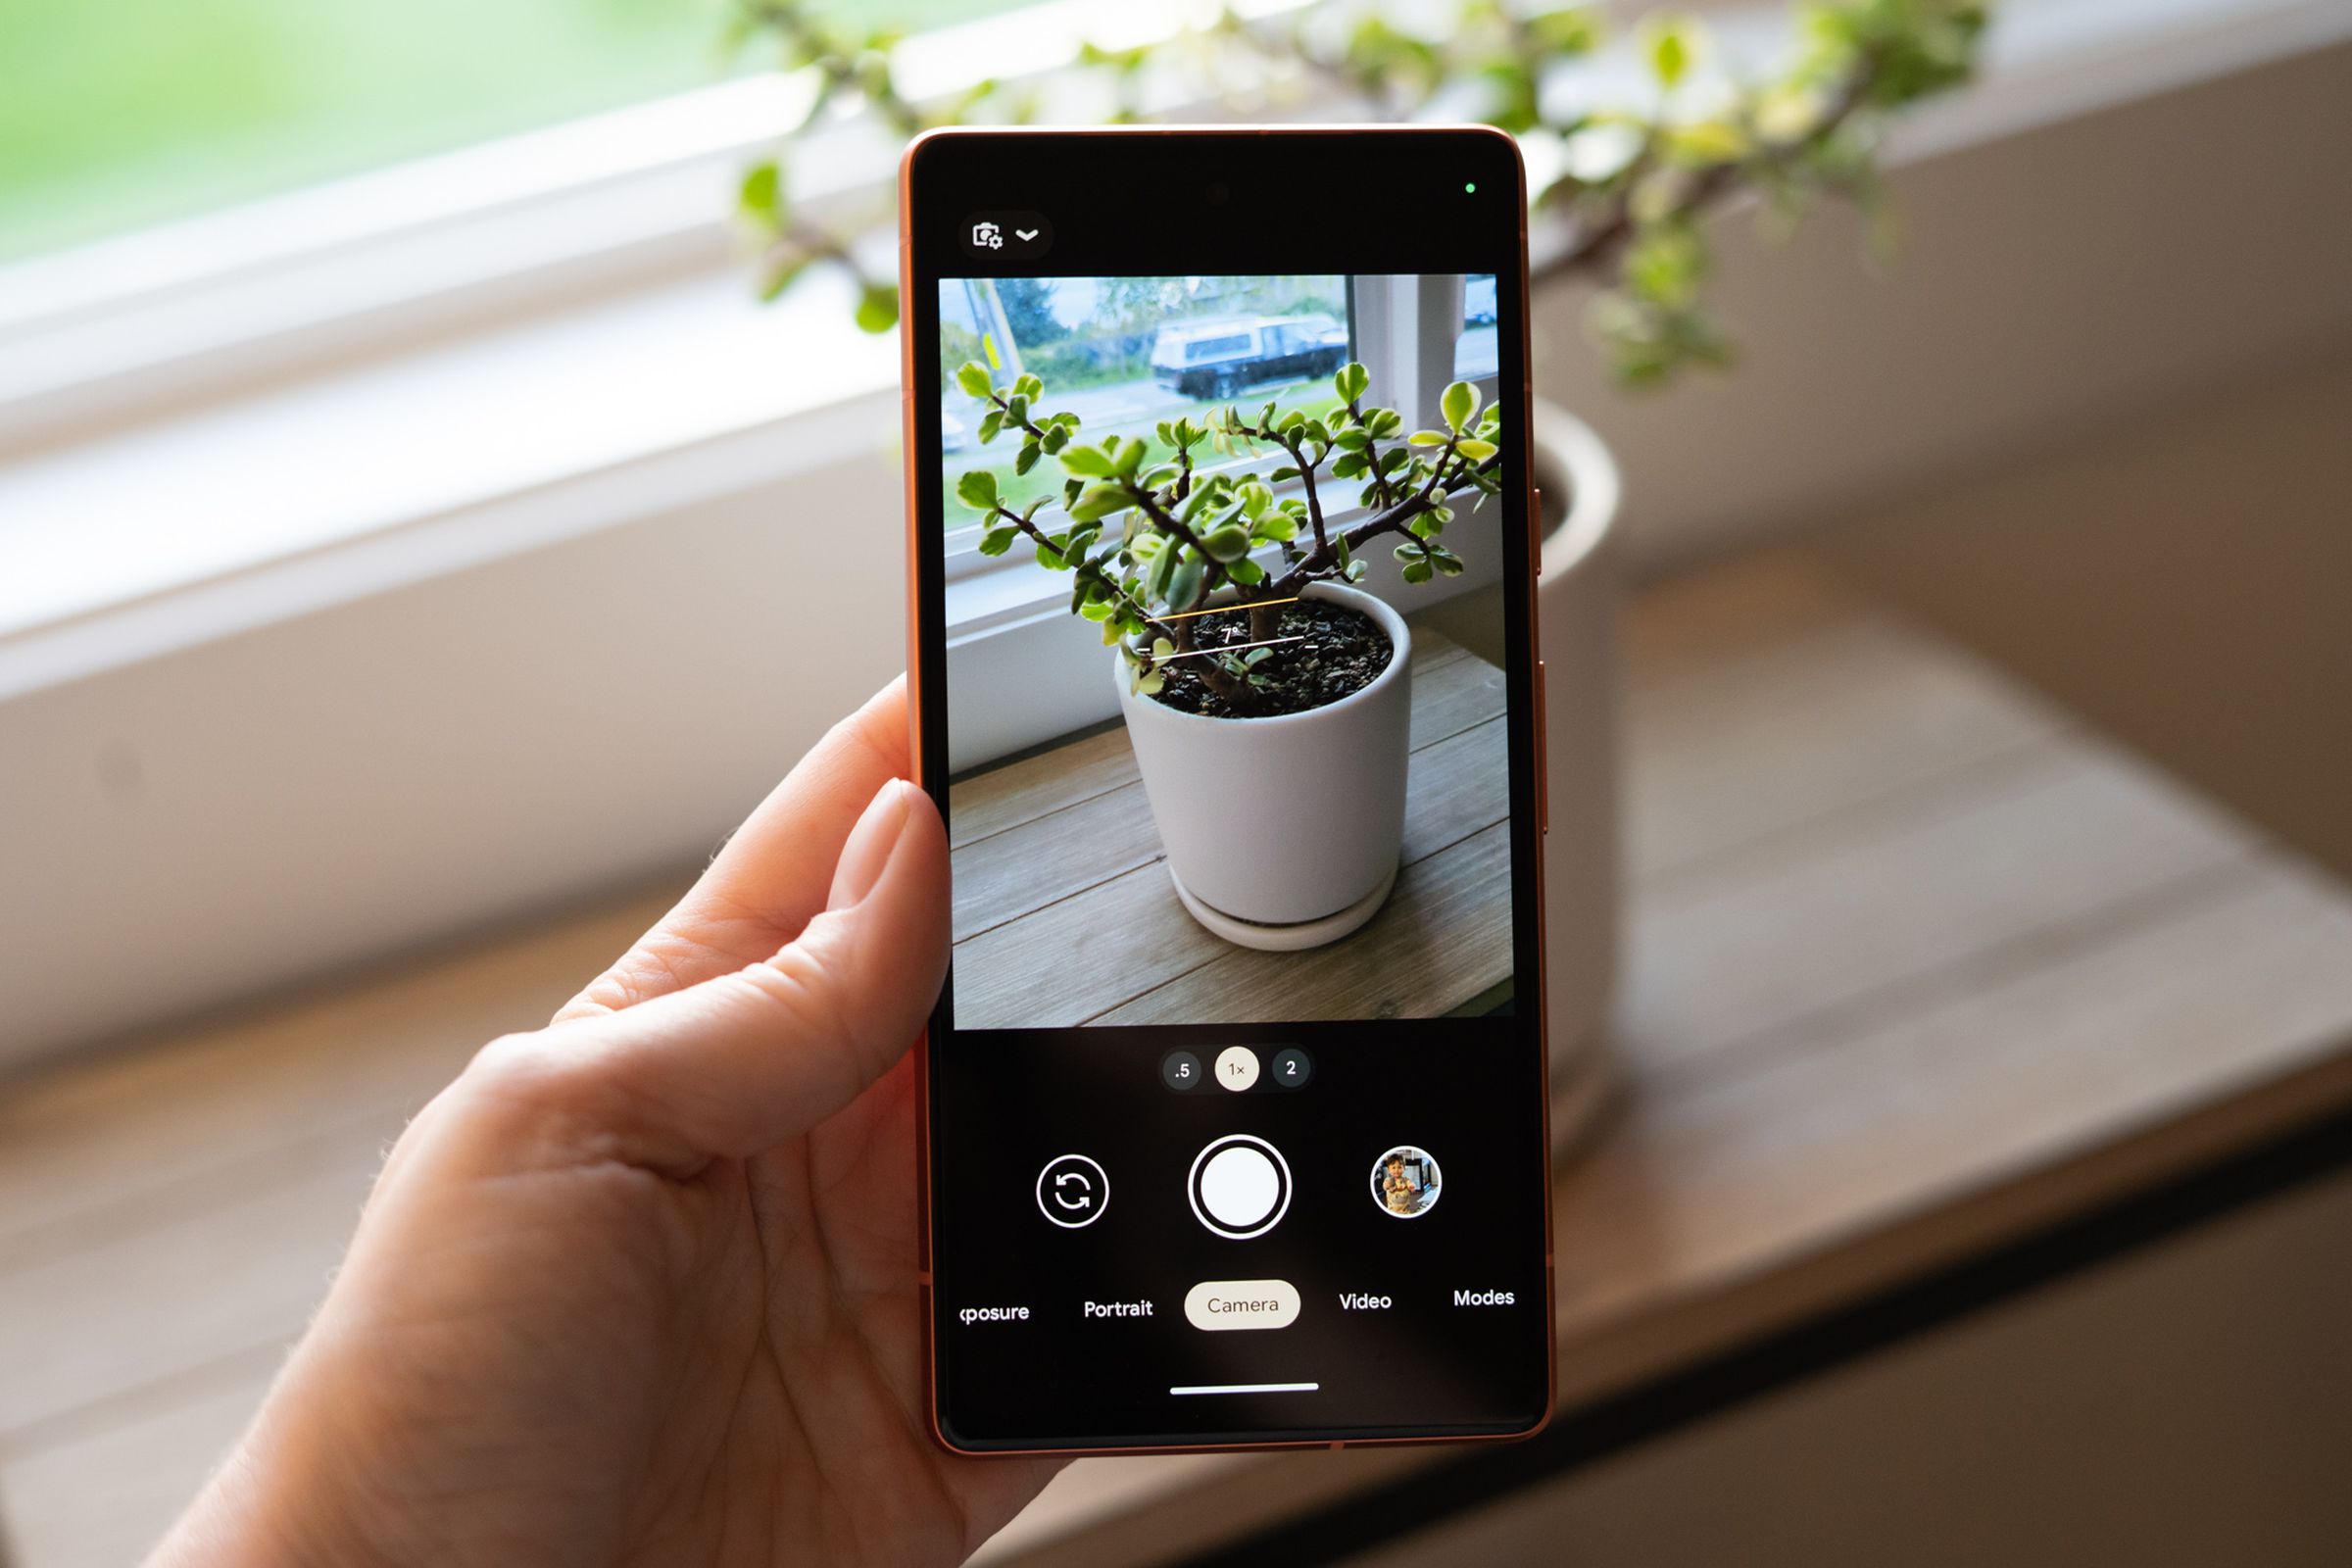 Pixel 7A camera mode taking a picture of a house plant.